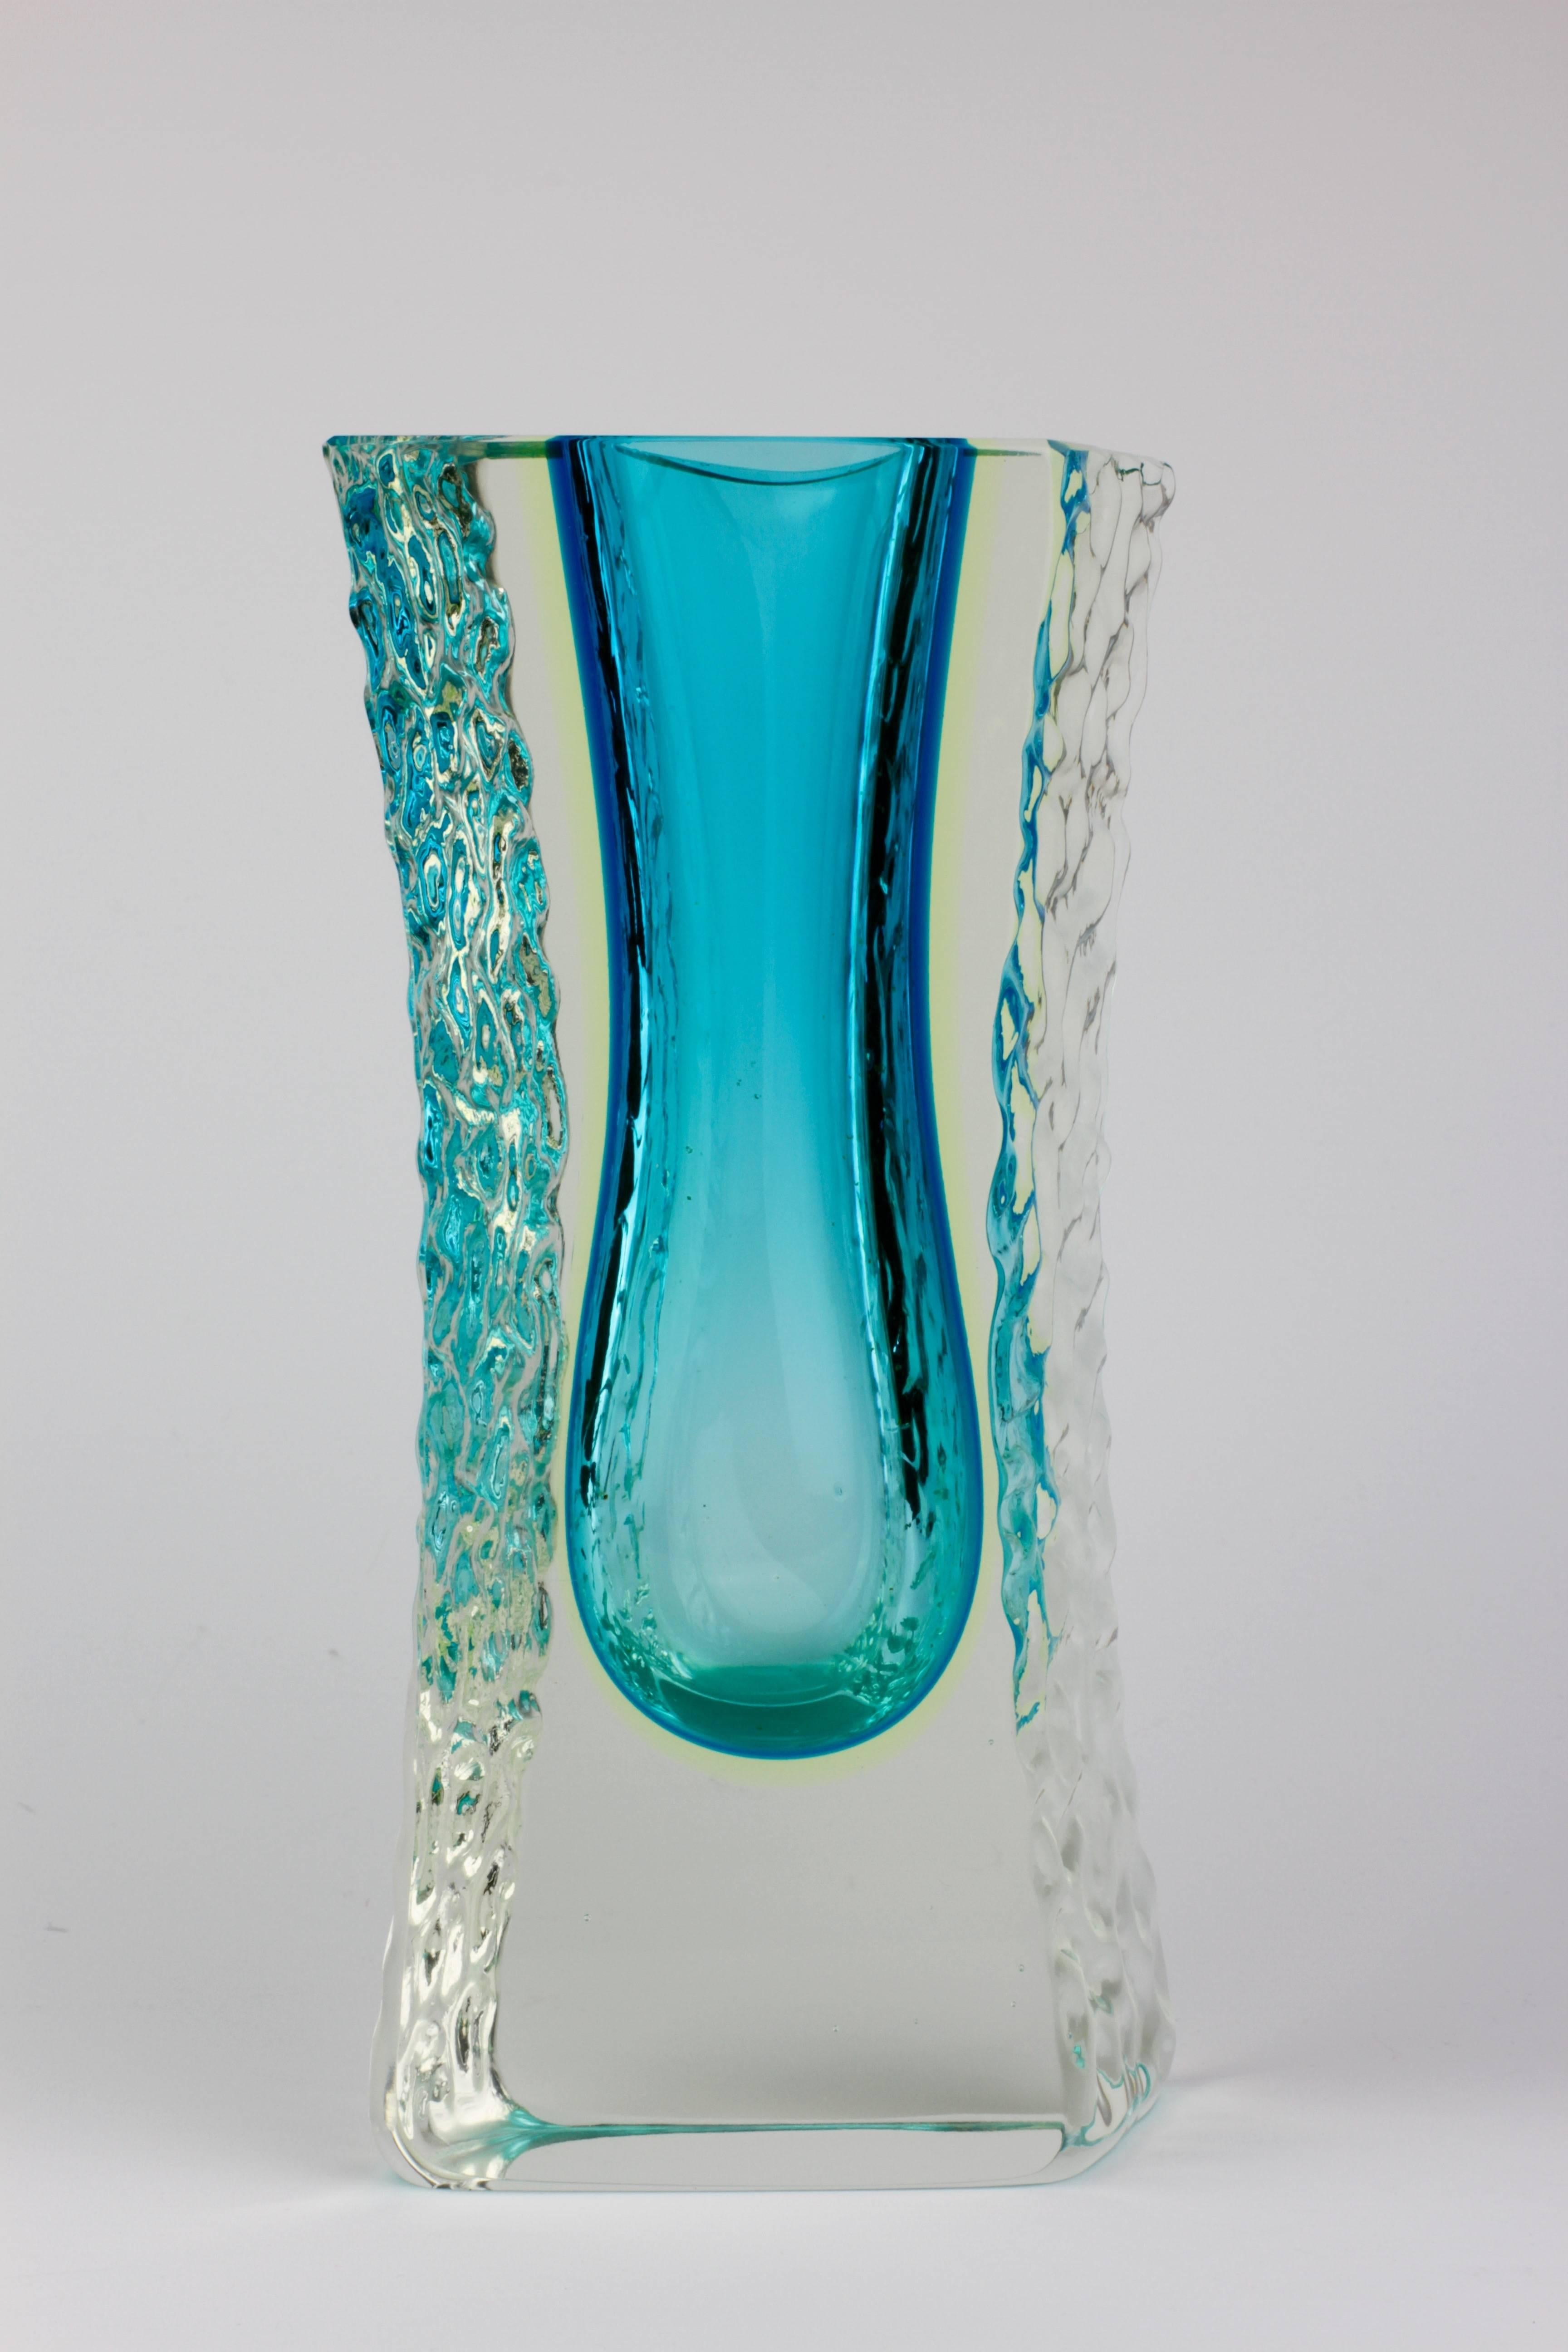 A beautiful Mid-Century Murano art glass vase attributed to Mandruzzato, circa 1980s. The combination of ocean blue and the textured clear 'Sommerso' ice glass looks simply stunning.

This is a rare color and size - a must have for any